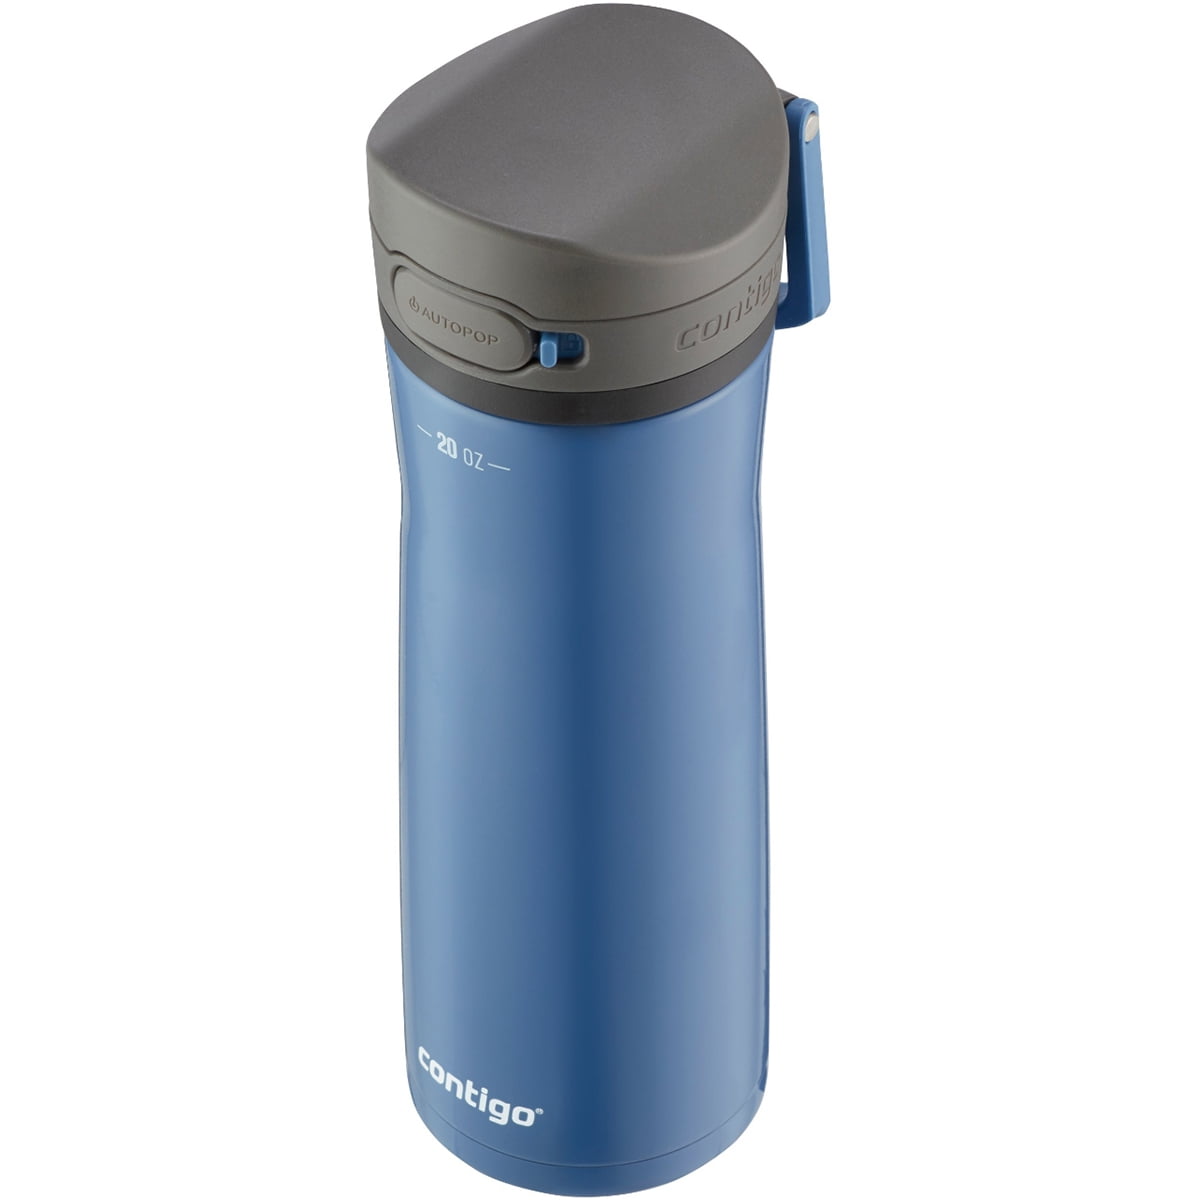 Contigo Jackson Chill 2.0 Vacuum-Insulated Stainless Steel Water Bottle,  Secure Lid Technology & Cor…See more Contigo Jackson Chill 2.0